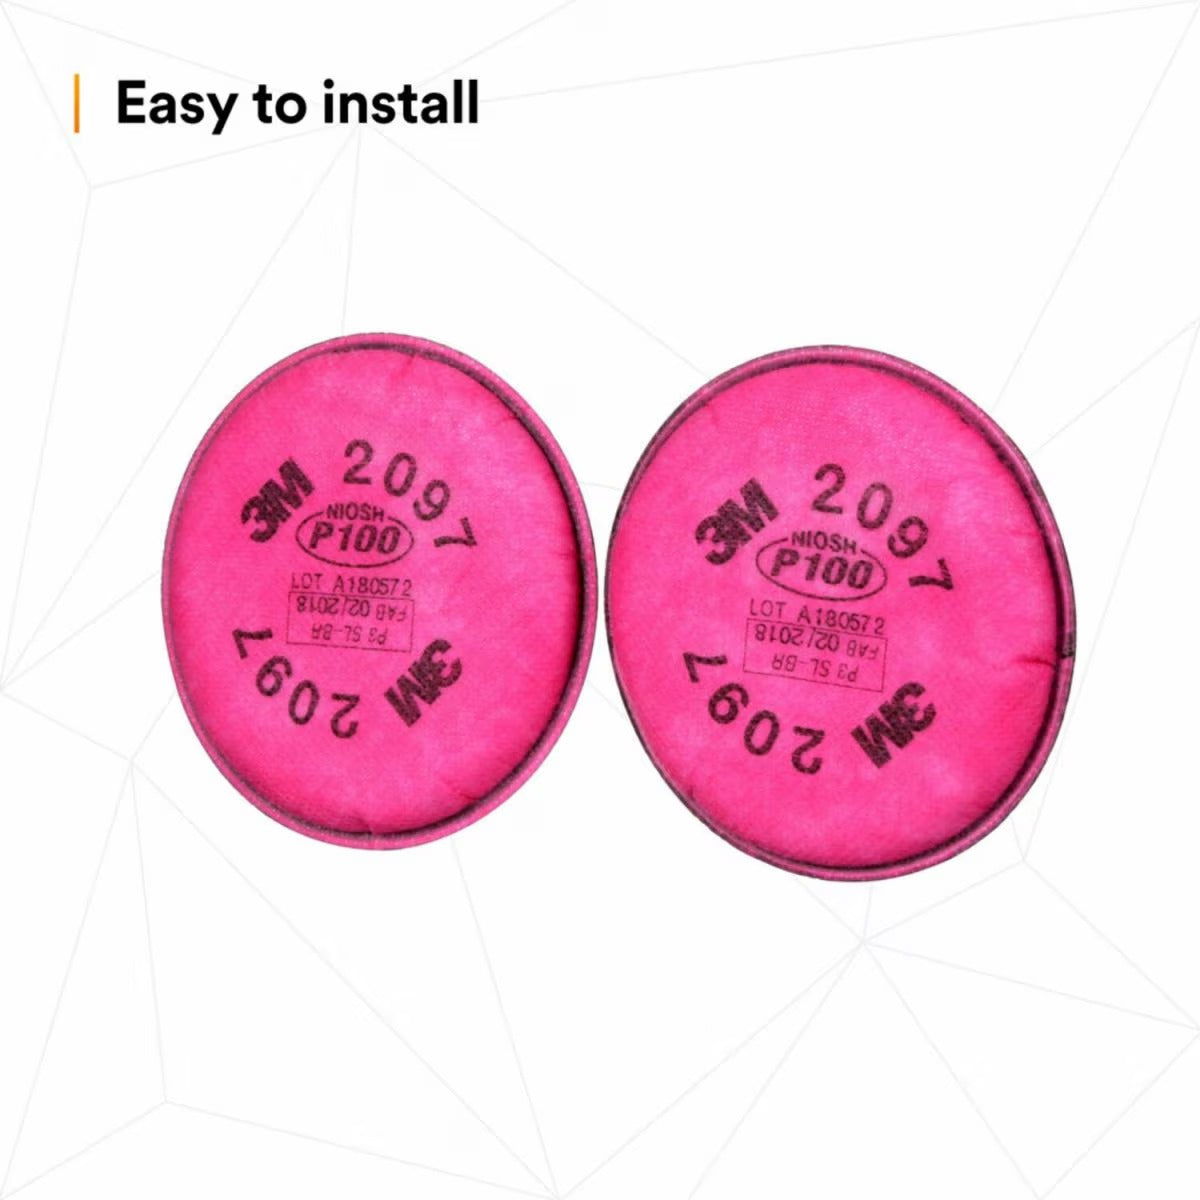 3M 2097 easy to install